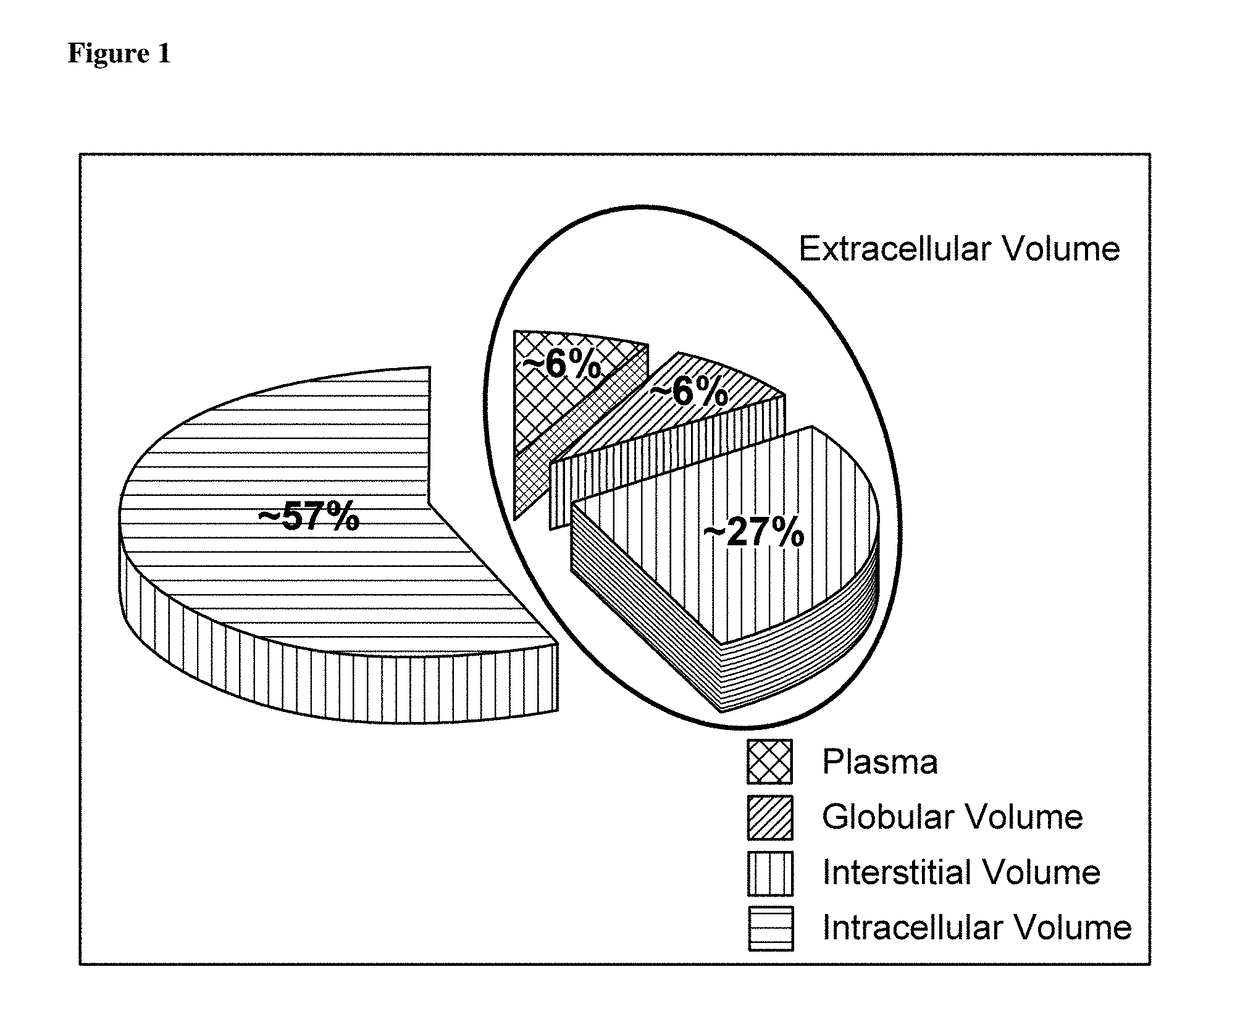 MR-proADM as marker for the extracellular volume status of a subject